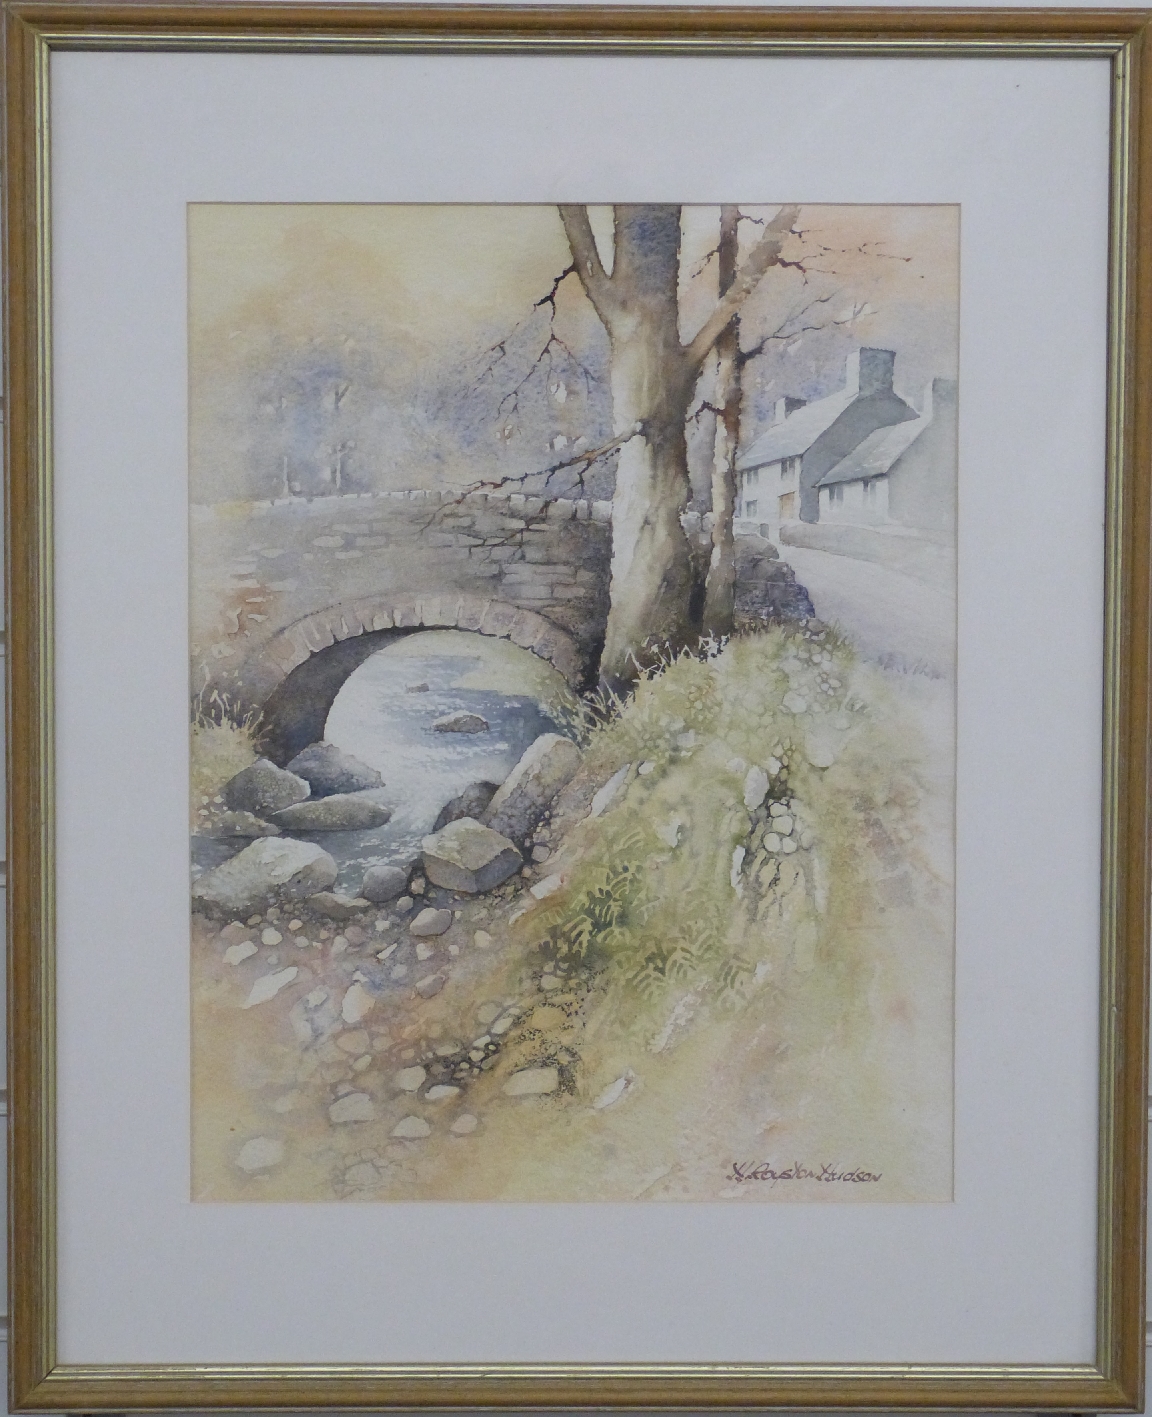 H Royston Hudson watercolour village scene with bridge over stream, 42 x 32cm, framed and glazed - Image 2 of 3